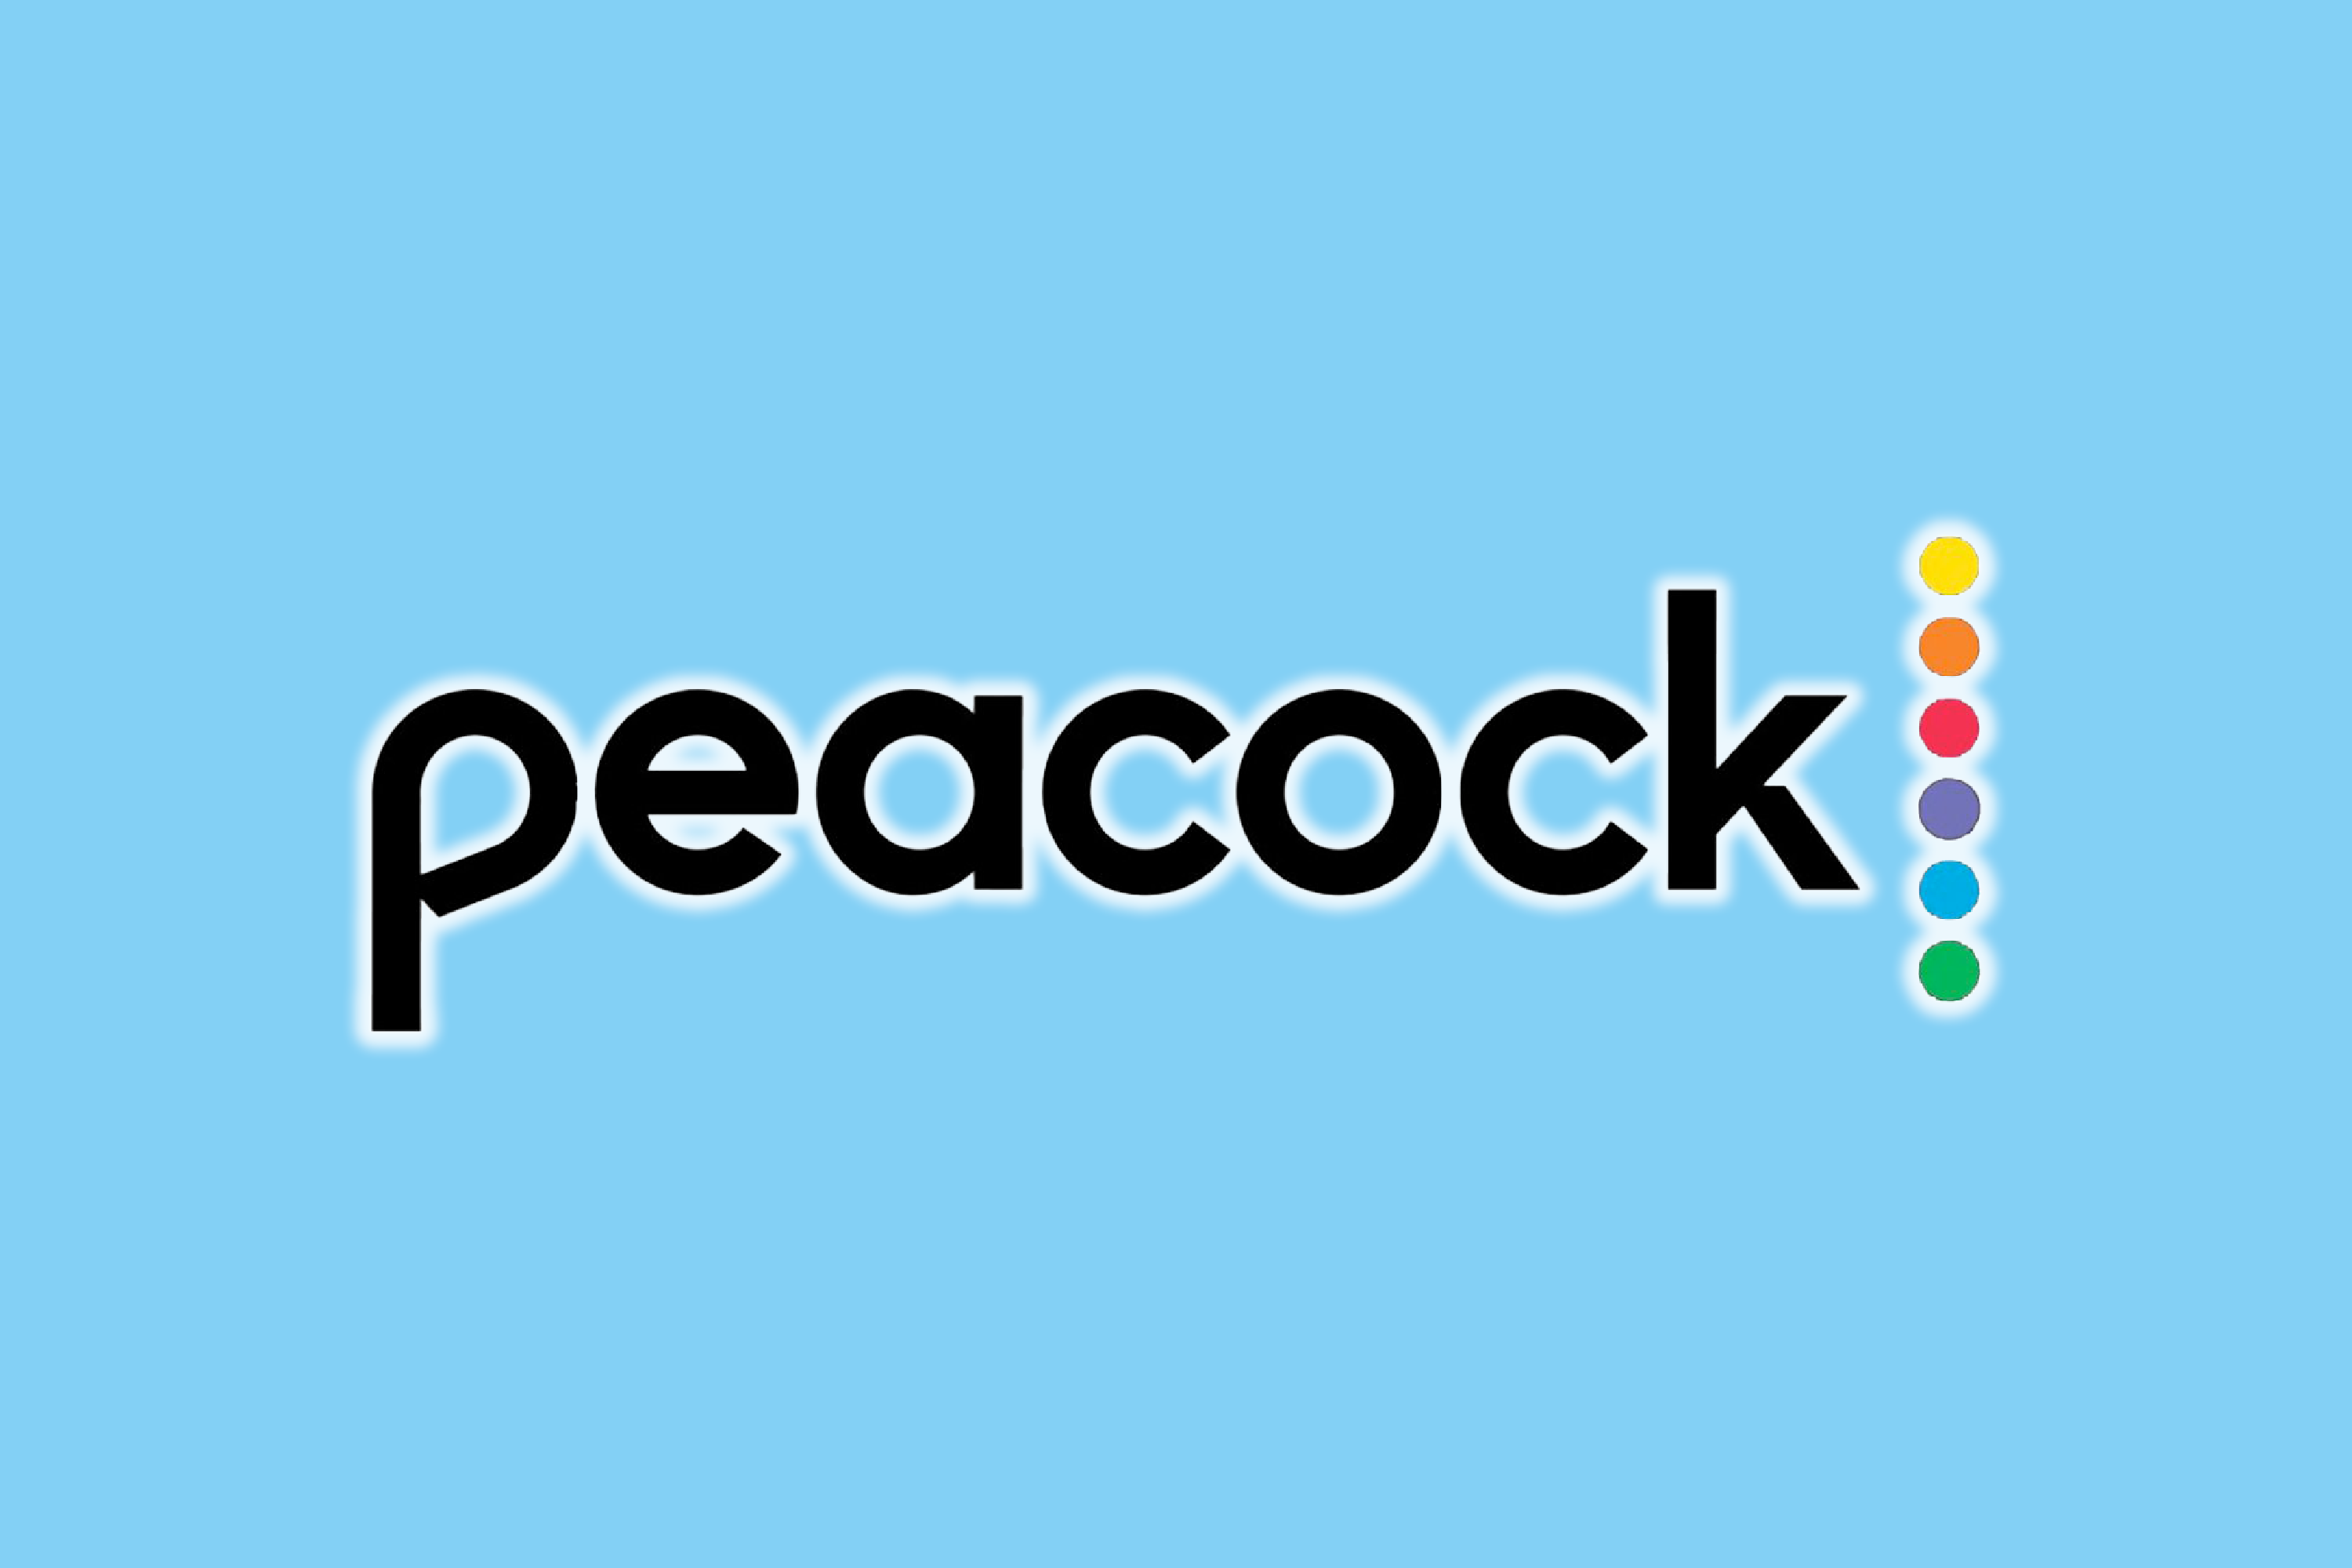 Peacock streaming service is coming to the UK, free to Sky and Now